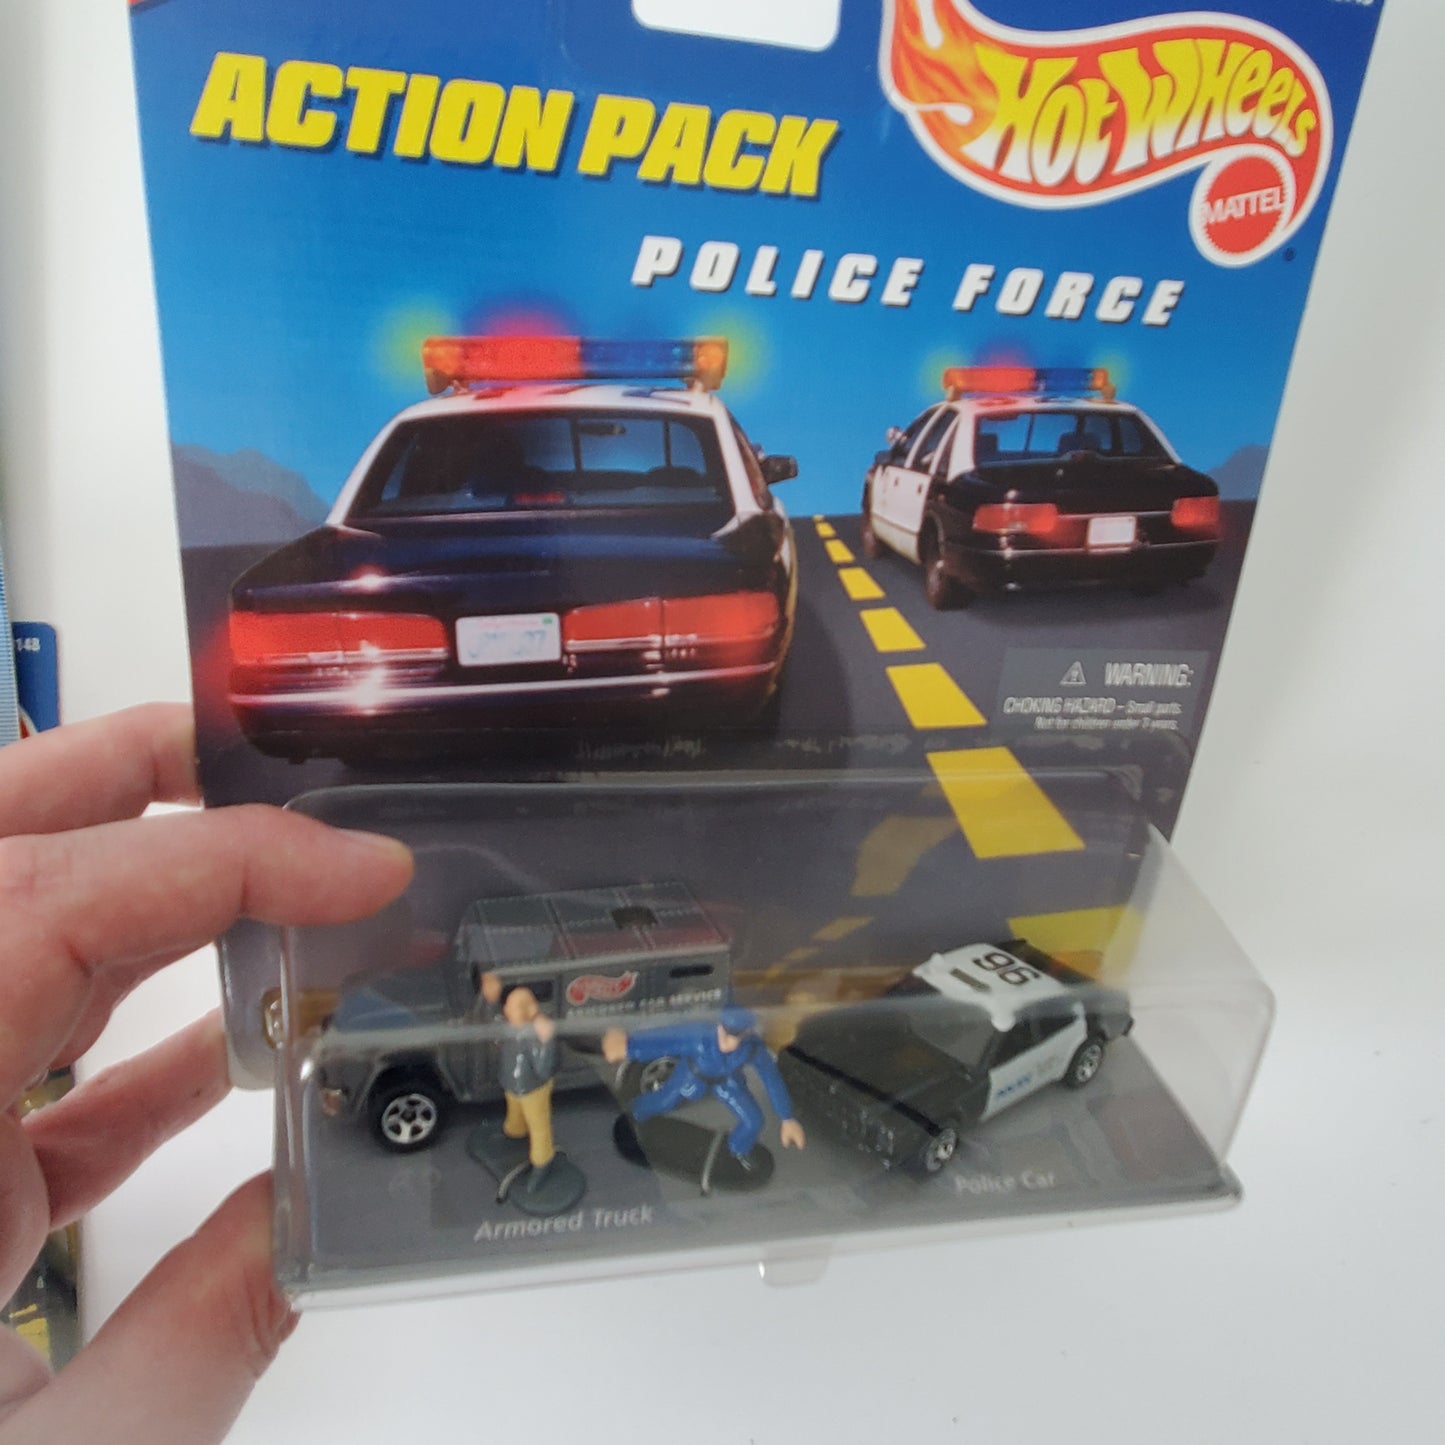 1996 Hot Wheels Action Pack Police Force Armored Truck Robbery